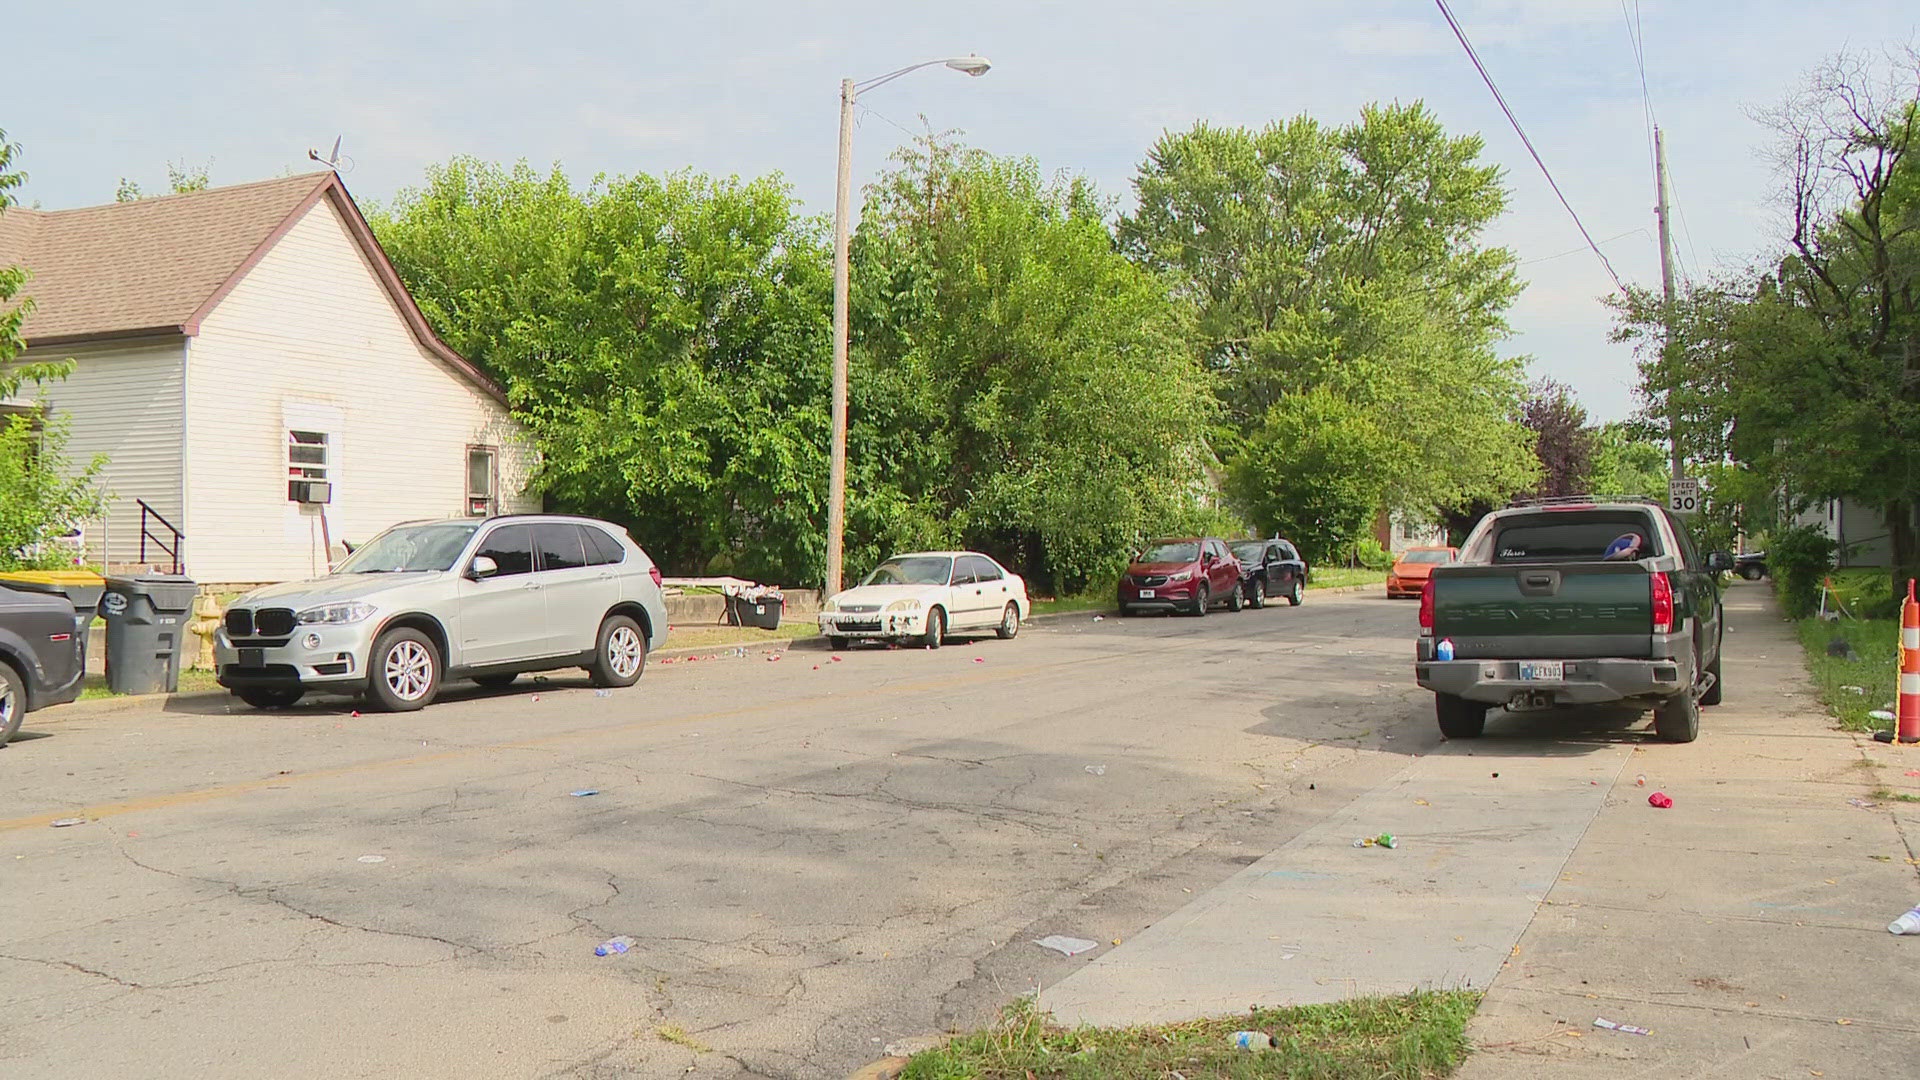 The shootings happened during an anti-violence block party on July 21.